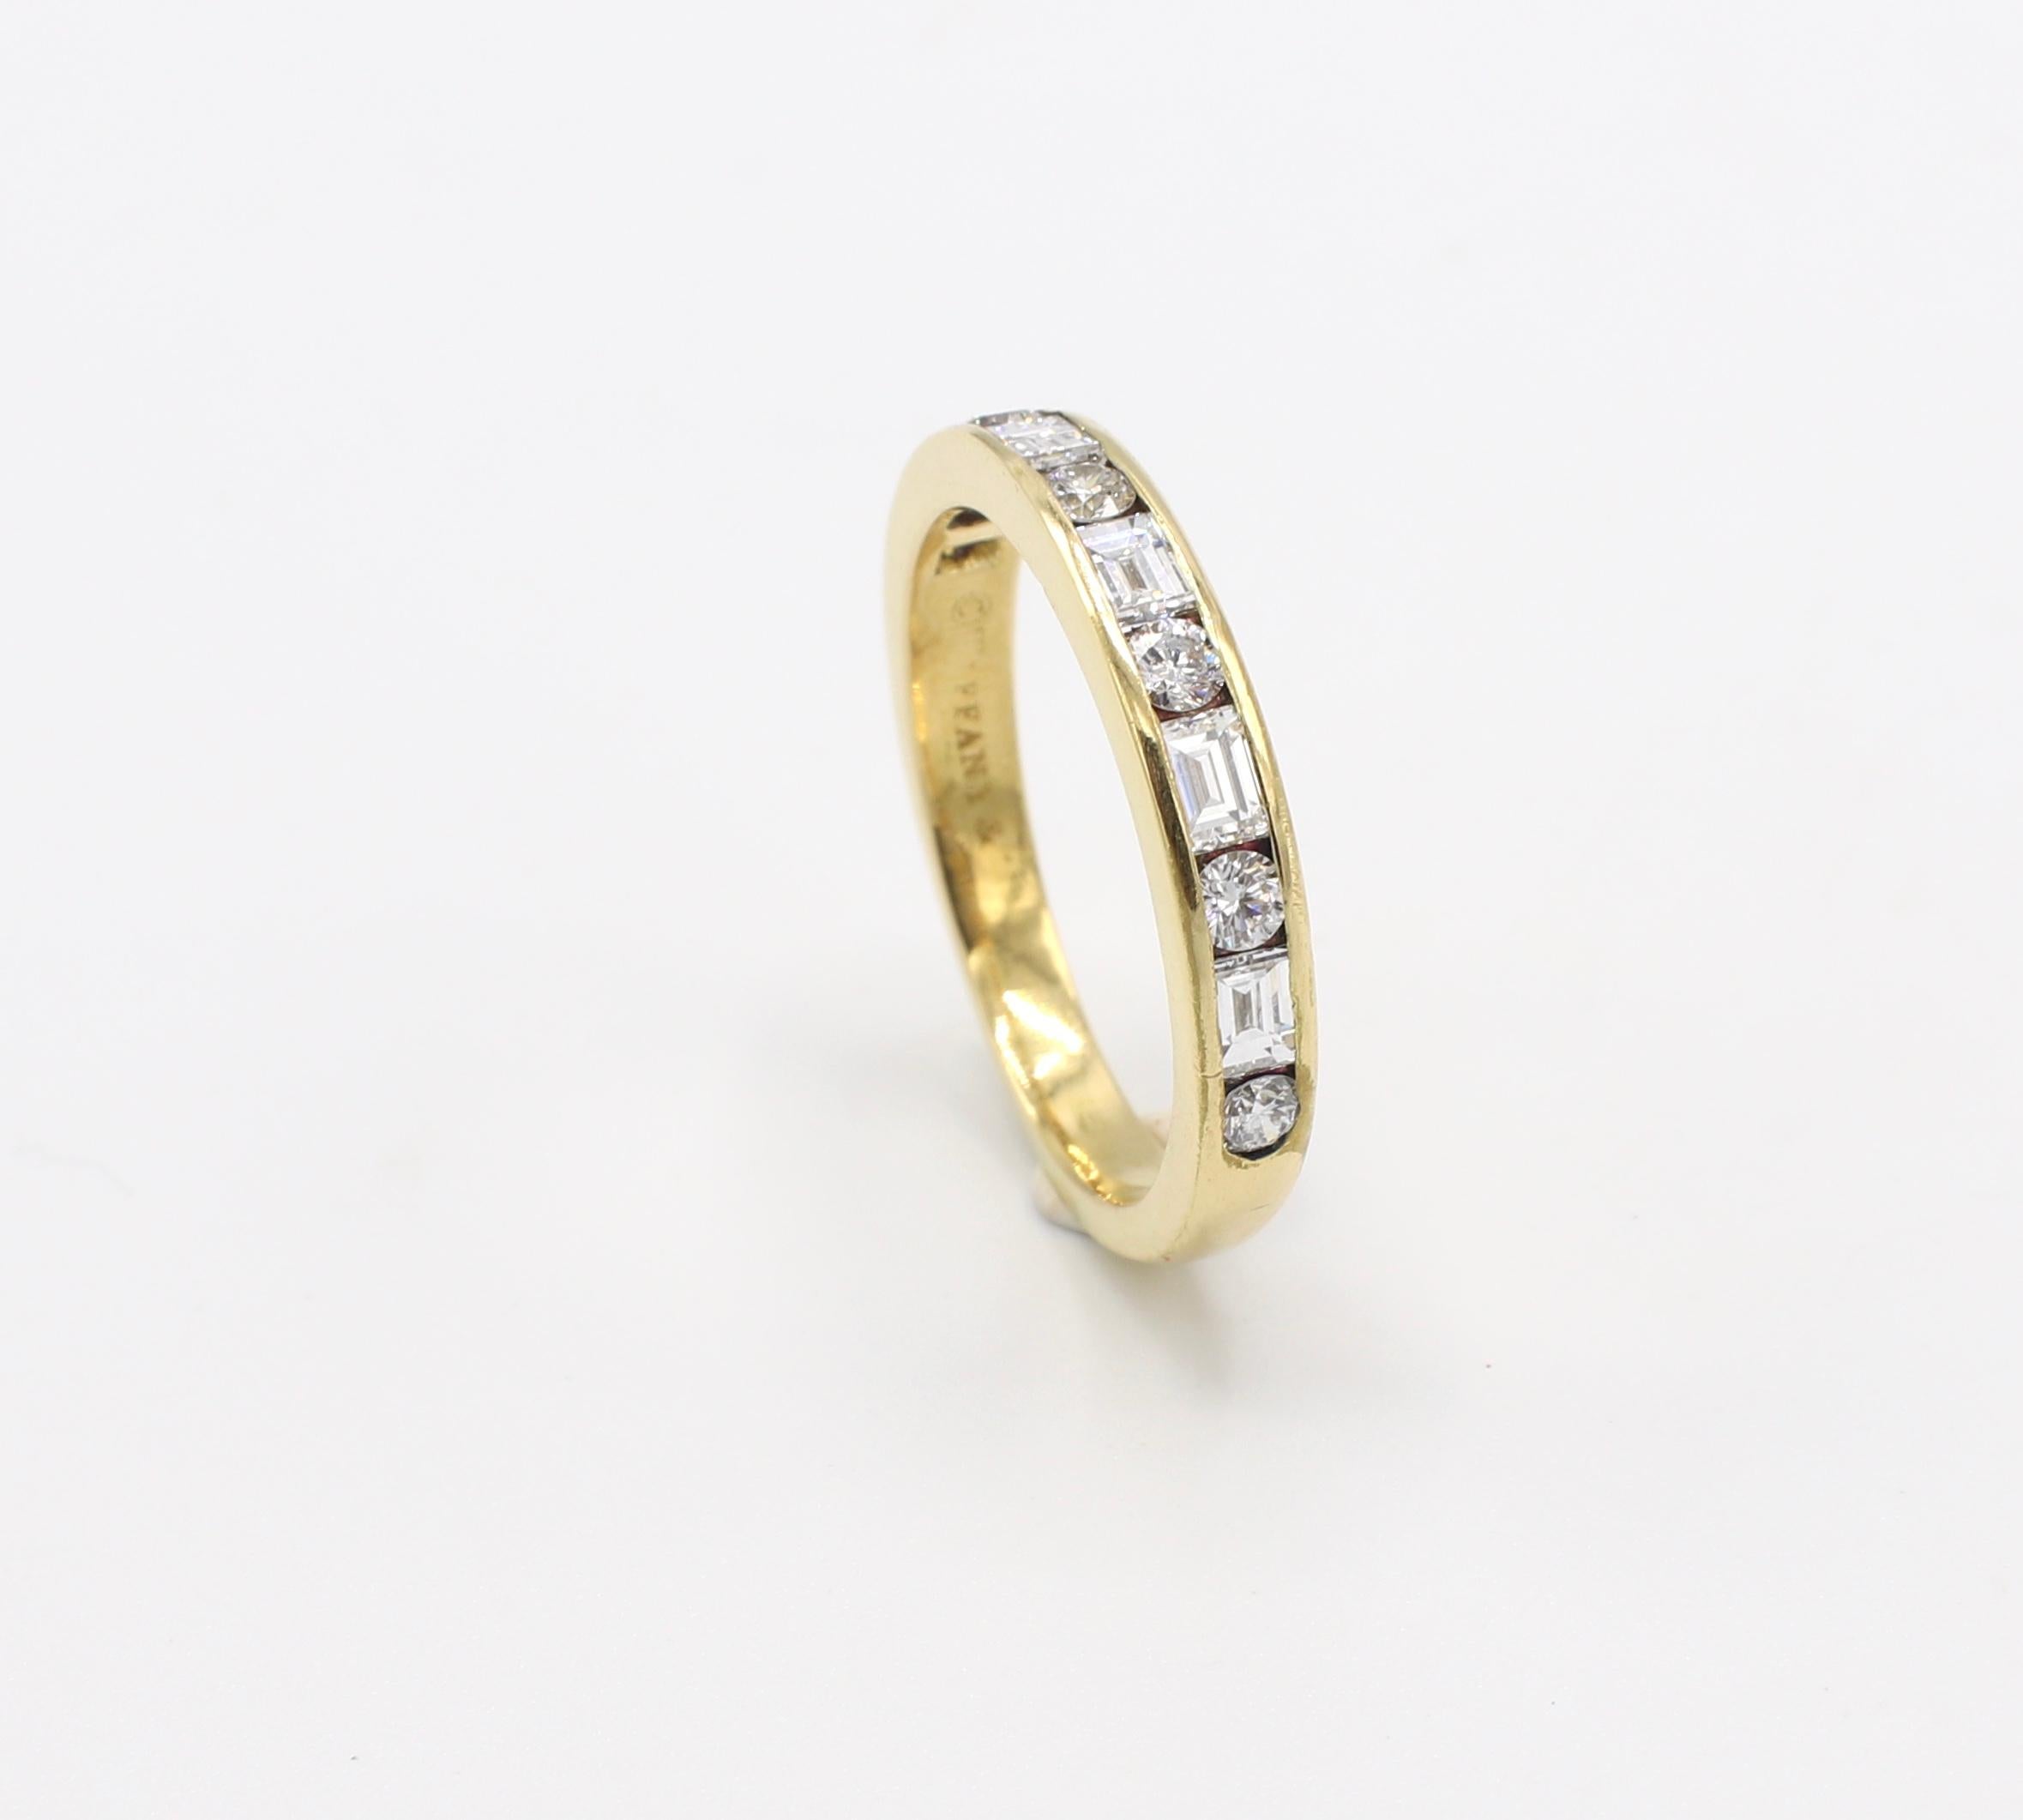 Tiffany & Co. 18K Gold Alternating Round & Baguette Diamond Channel-Set Band Ring Size 5

Metal: 18K yellow gold
Weight: 2.94 grams
Diamonds: Approx. .68 CTW F-G VS 
Band is 3mm wide 
Size: 5 (US)
Tiffany box included as pictured 
